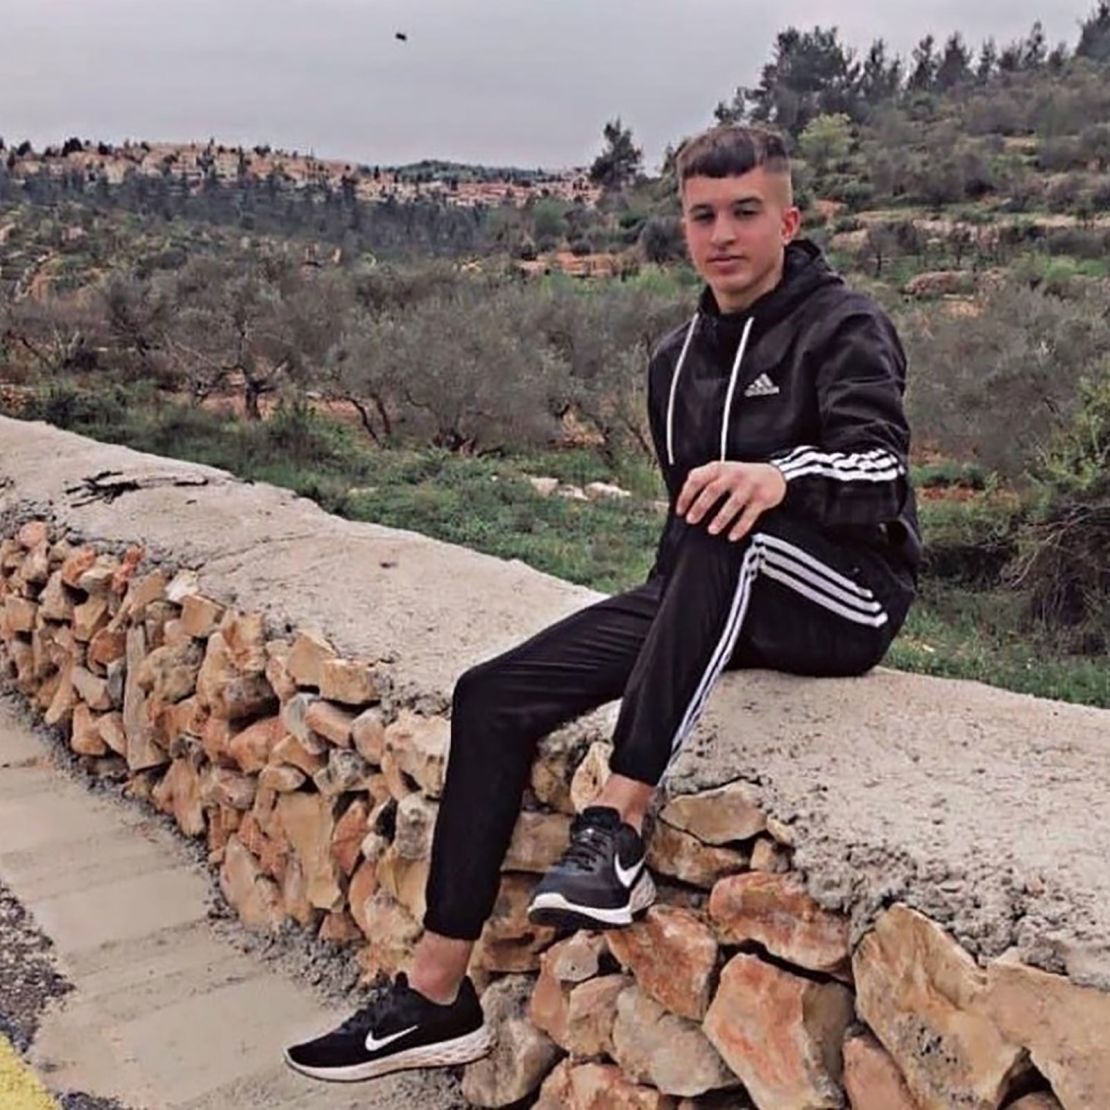 17-year-old US citizen Mohammad Ahmad Khdour was shot to death in the West Bank.